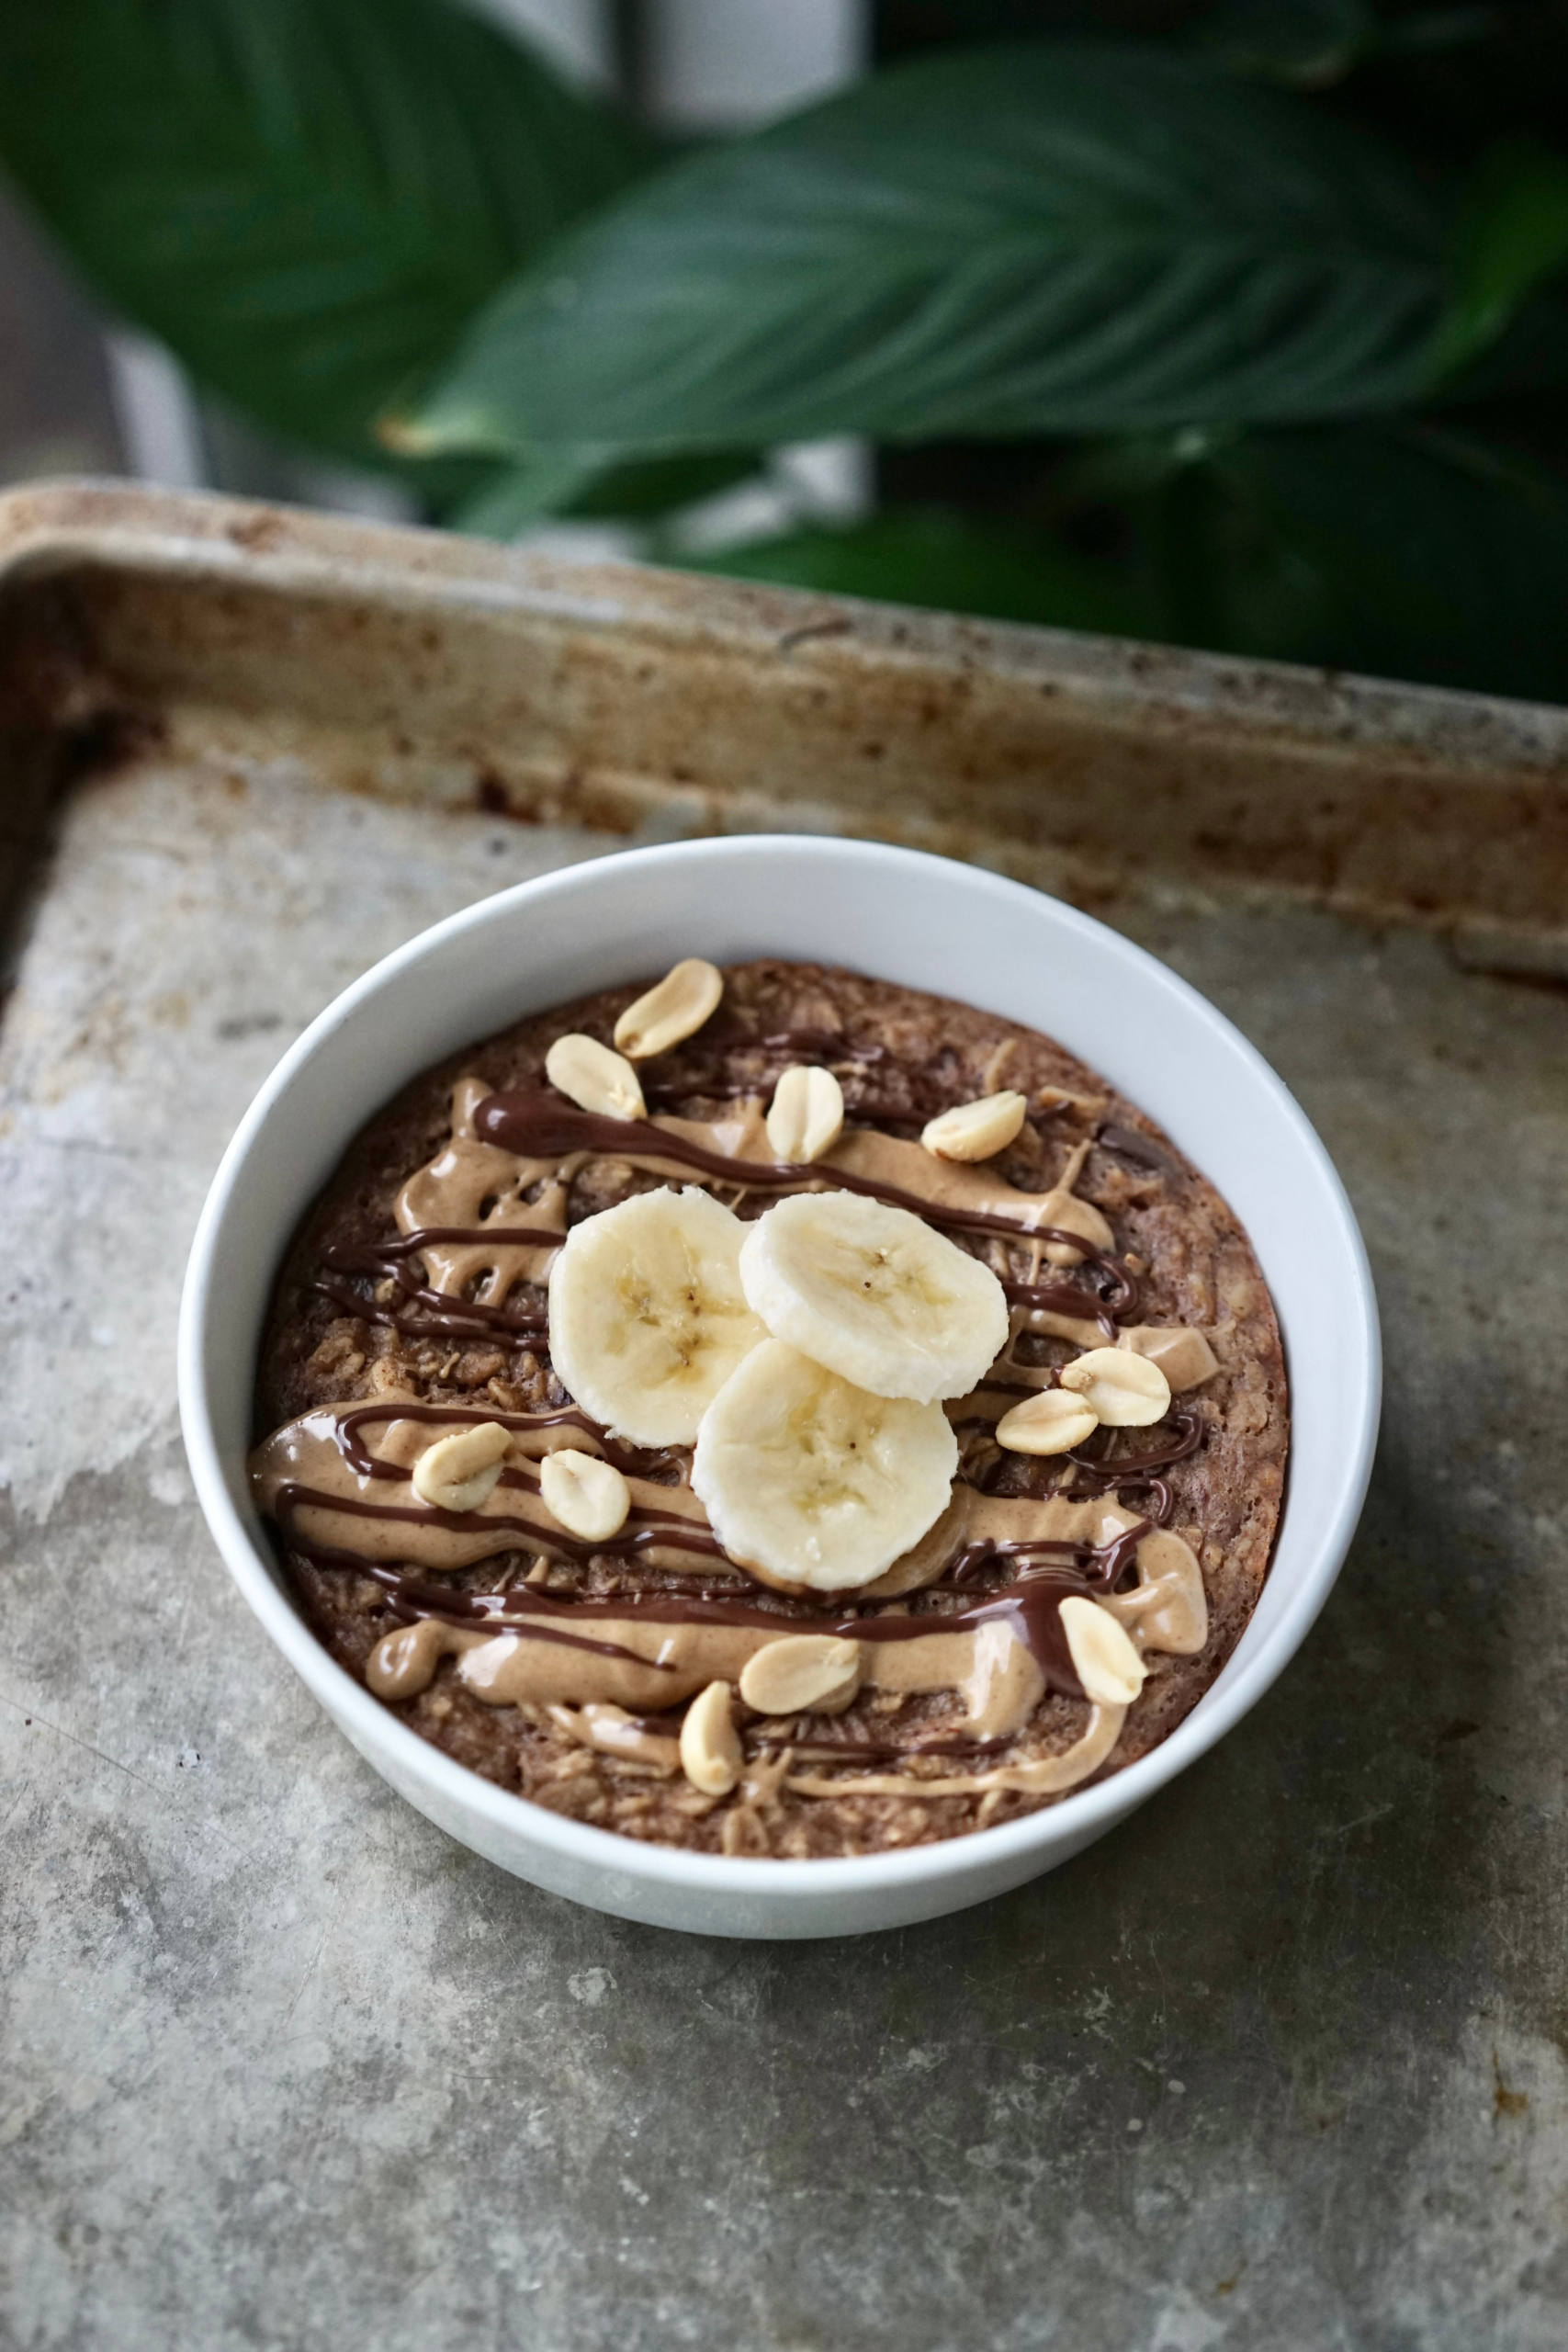 Baked Vegan Peanut Butter Banana Chocolate Chunk Oatmeal | Living Healthy in Seattle